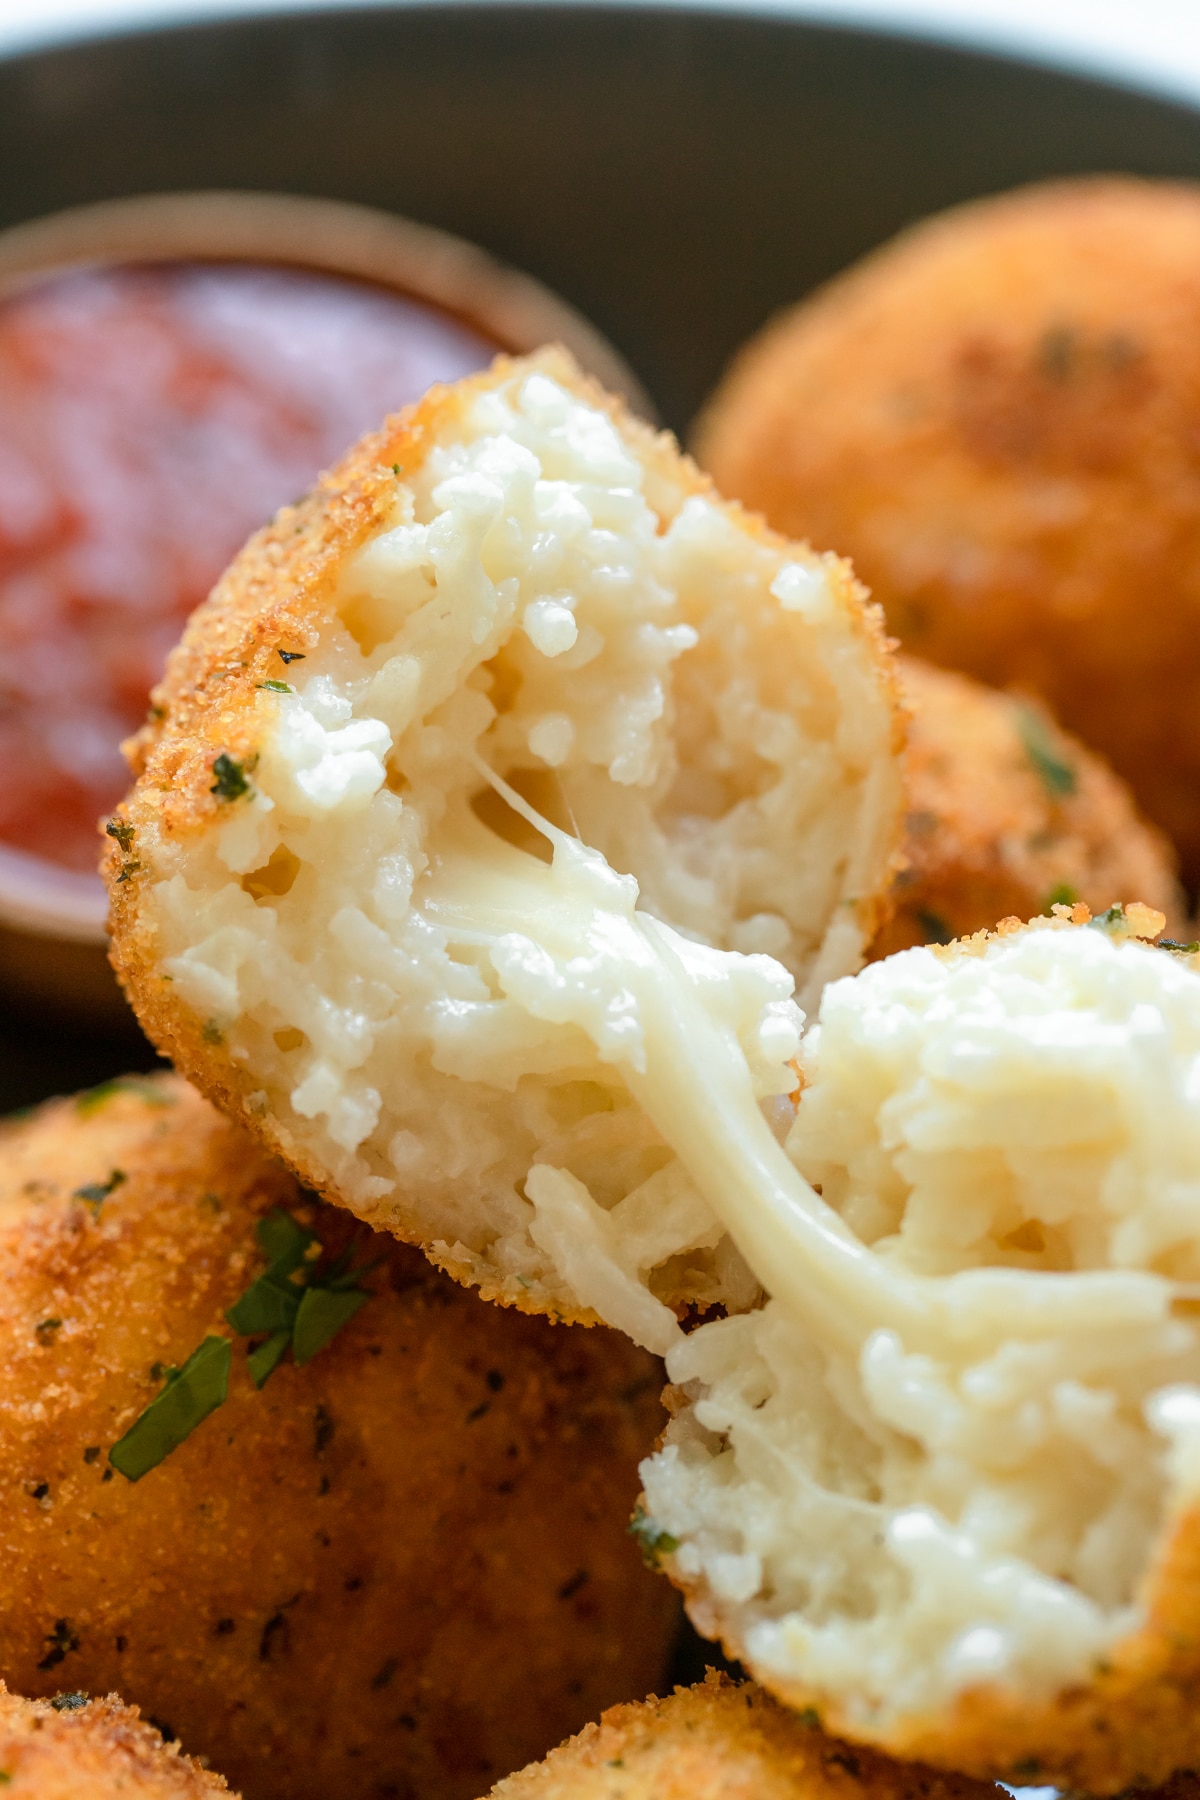 an up close image of the middle of an arancini ball with gooey mozzarella in the center